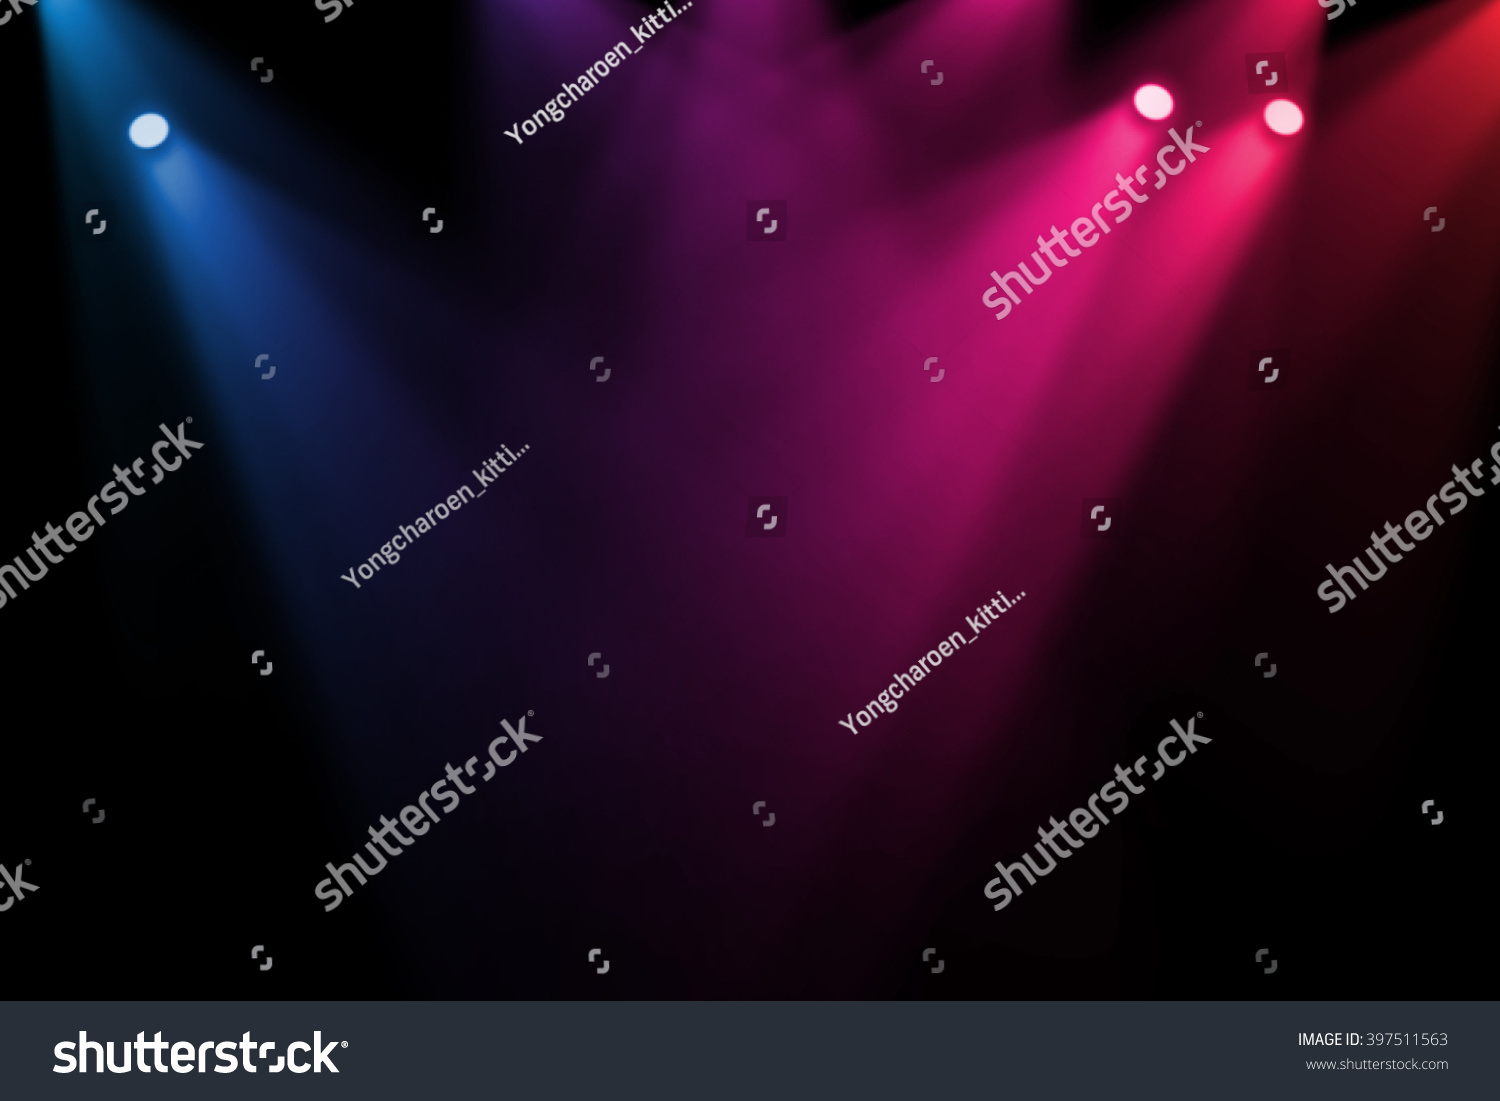 Colorful stage background  #397511563